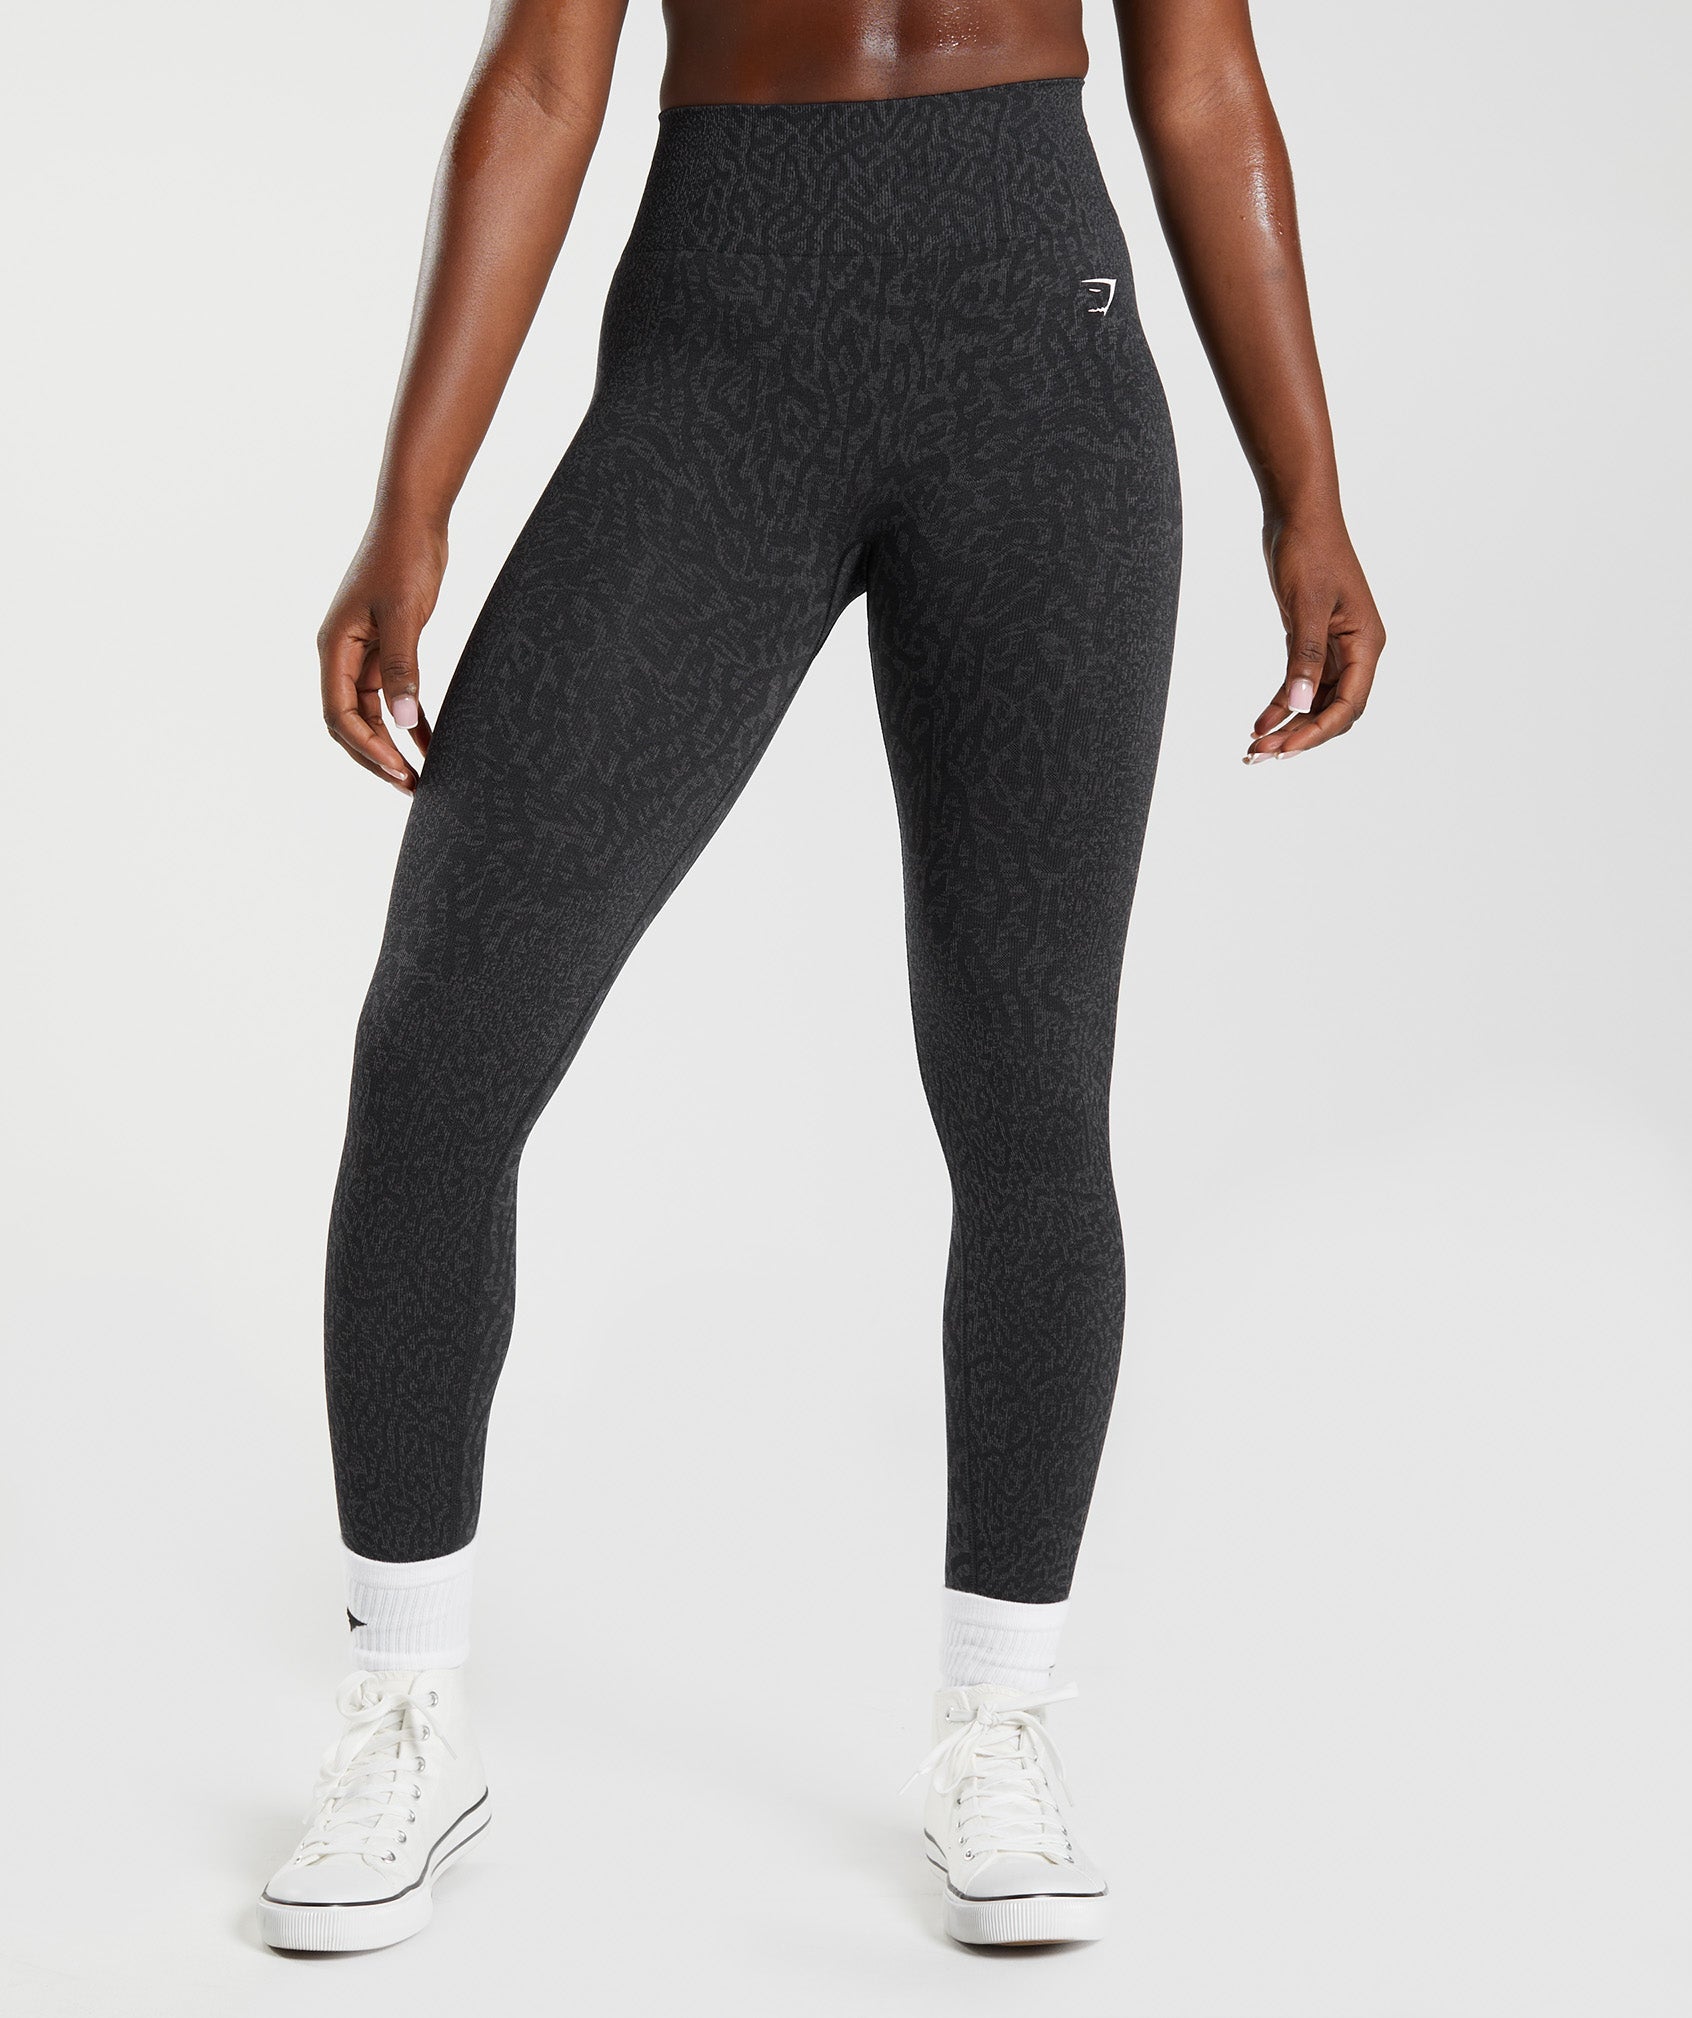 Gymshark, Other, Adapt Animal Seamless Leggings By Gymshark Size Xs